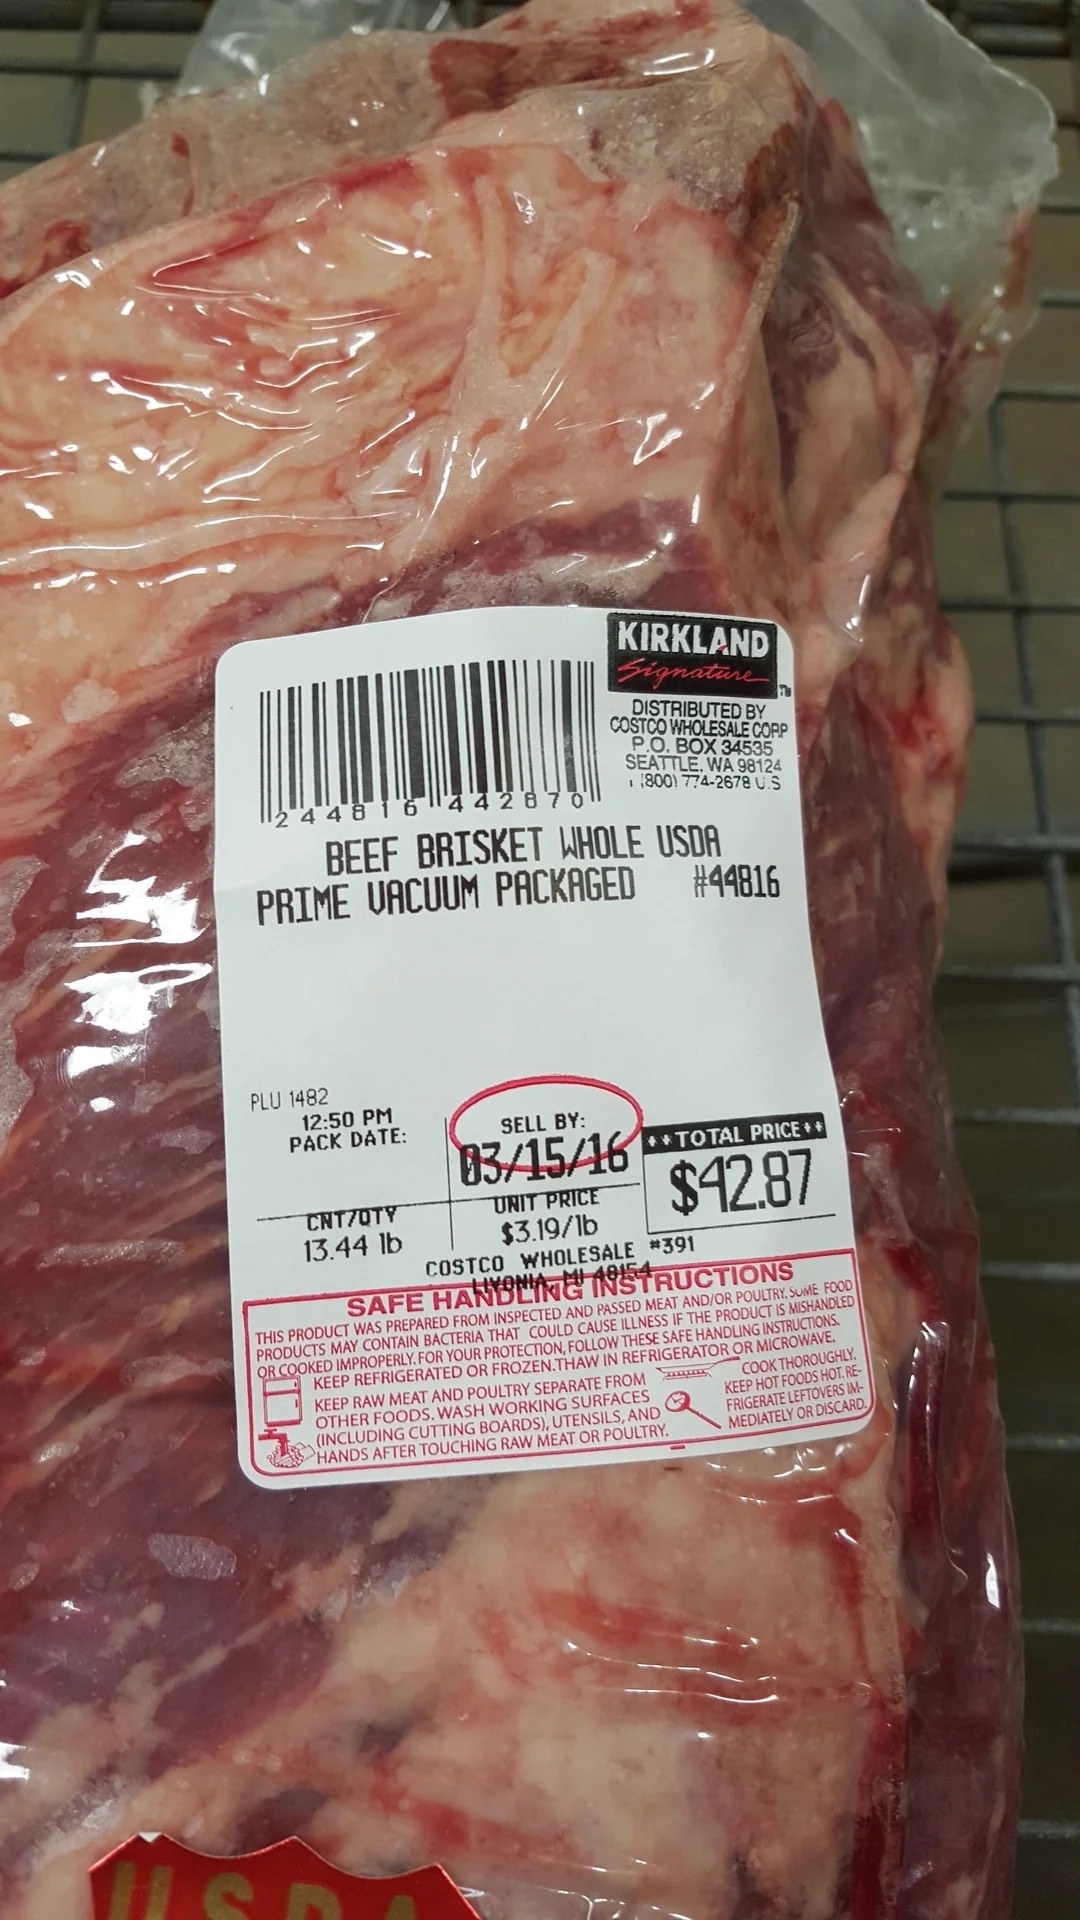 Packaged Kirkland beef brisket with price and sell-by date label, indicating it&#x27;s USDA choice